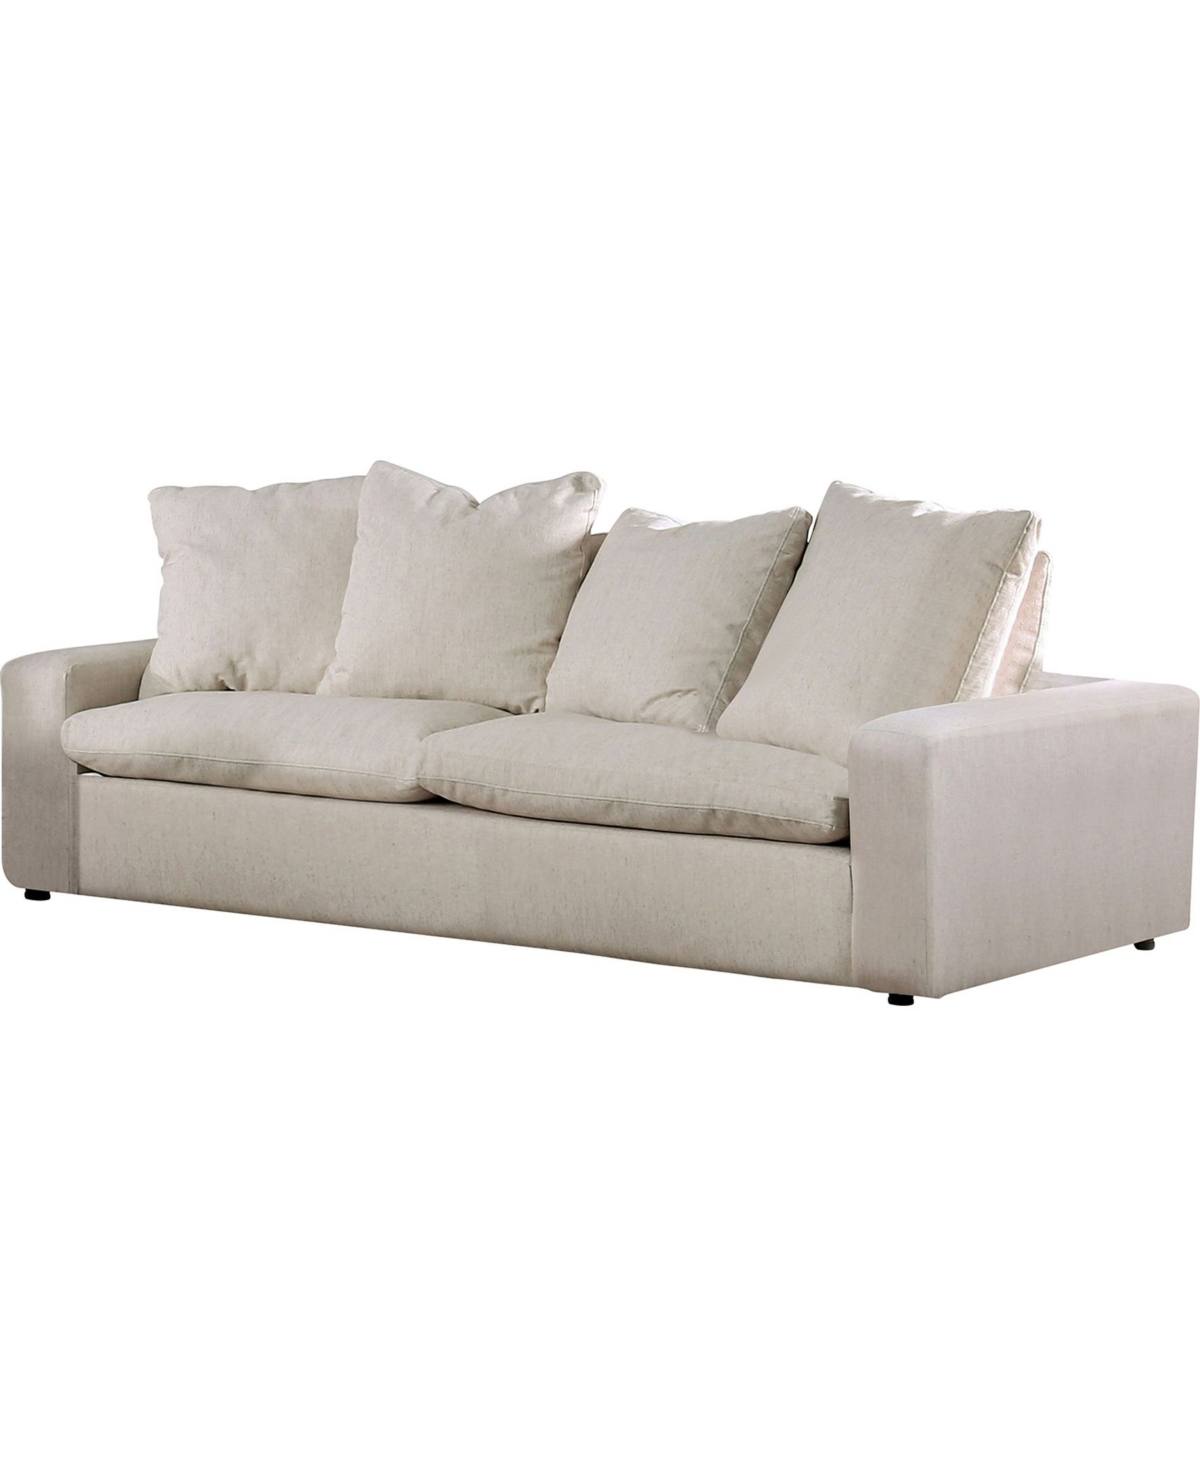 of America Anchora Upholstered Sofa